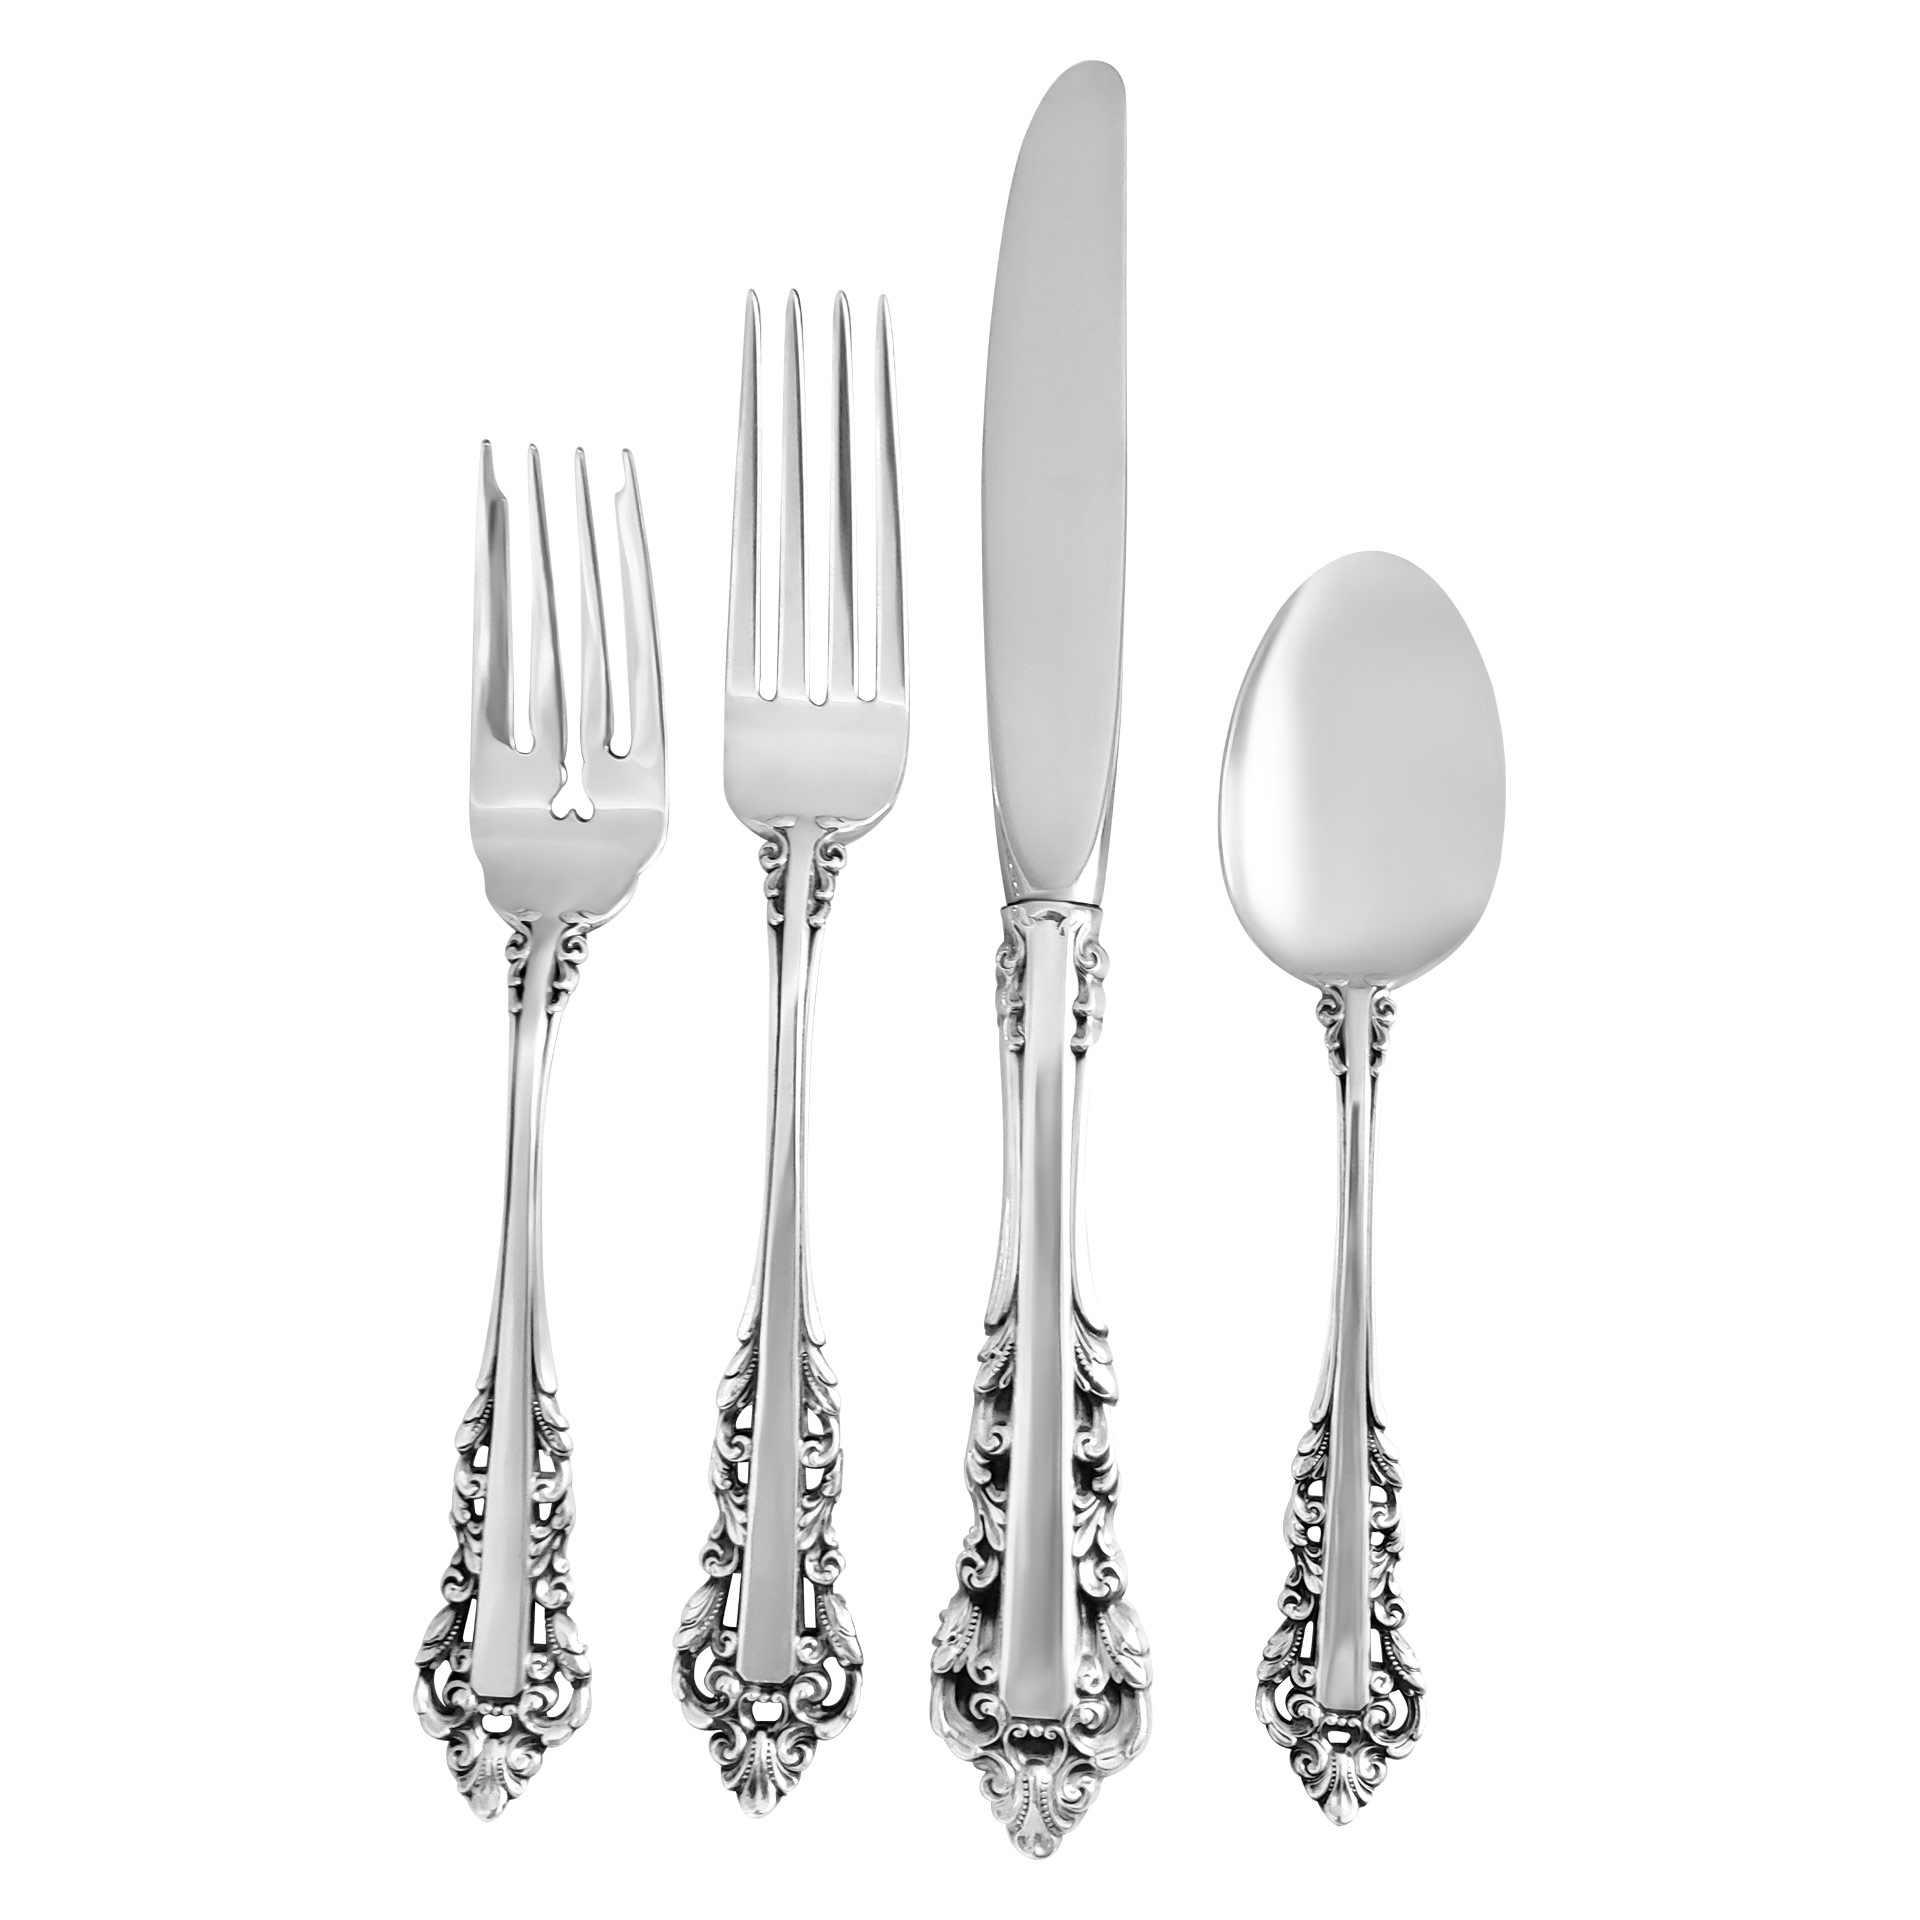 "MEDICI" Sterling Silver Flatware Set by Gorham, patented in 1971- 4 place setting for 12 (some are 16) with 2 seving pieces. Over 2000 in sterling silver. image 1